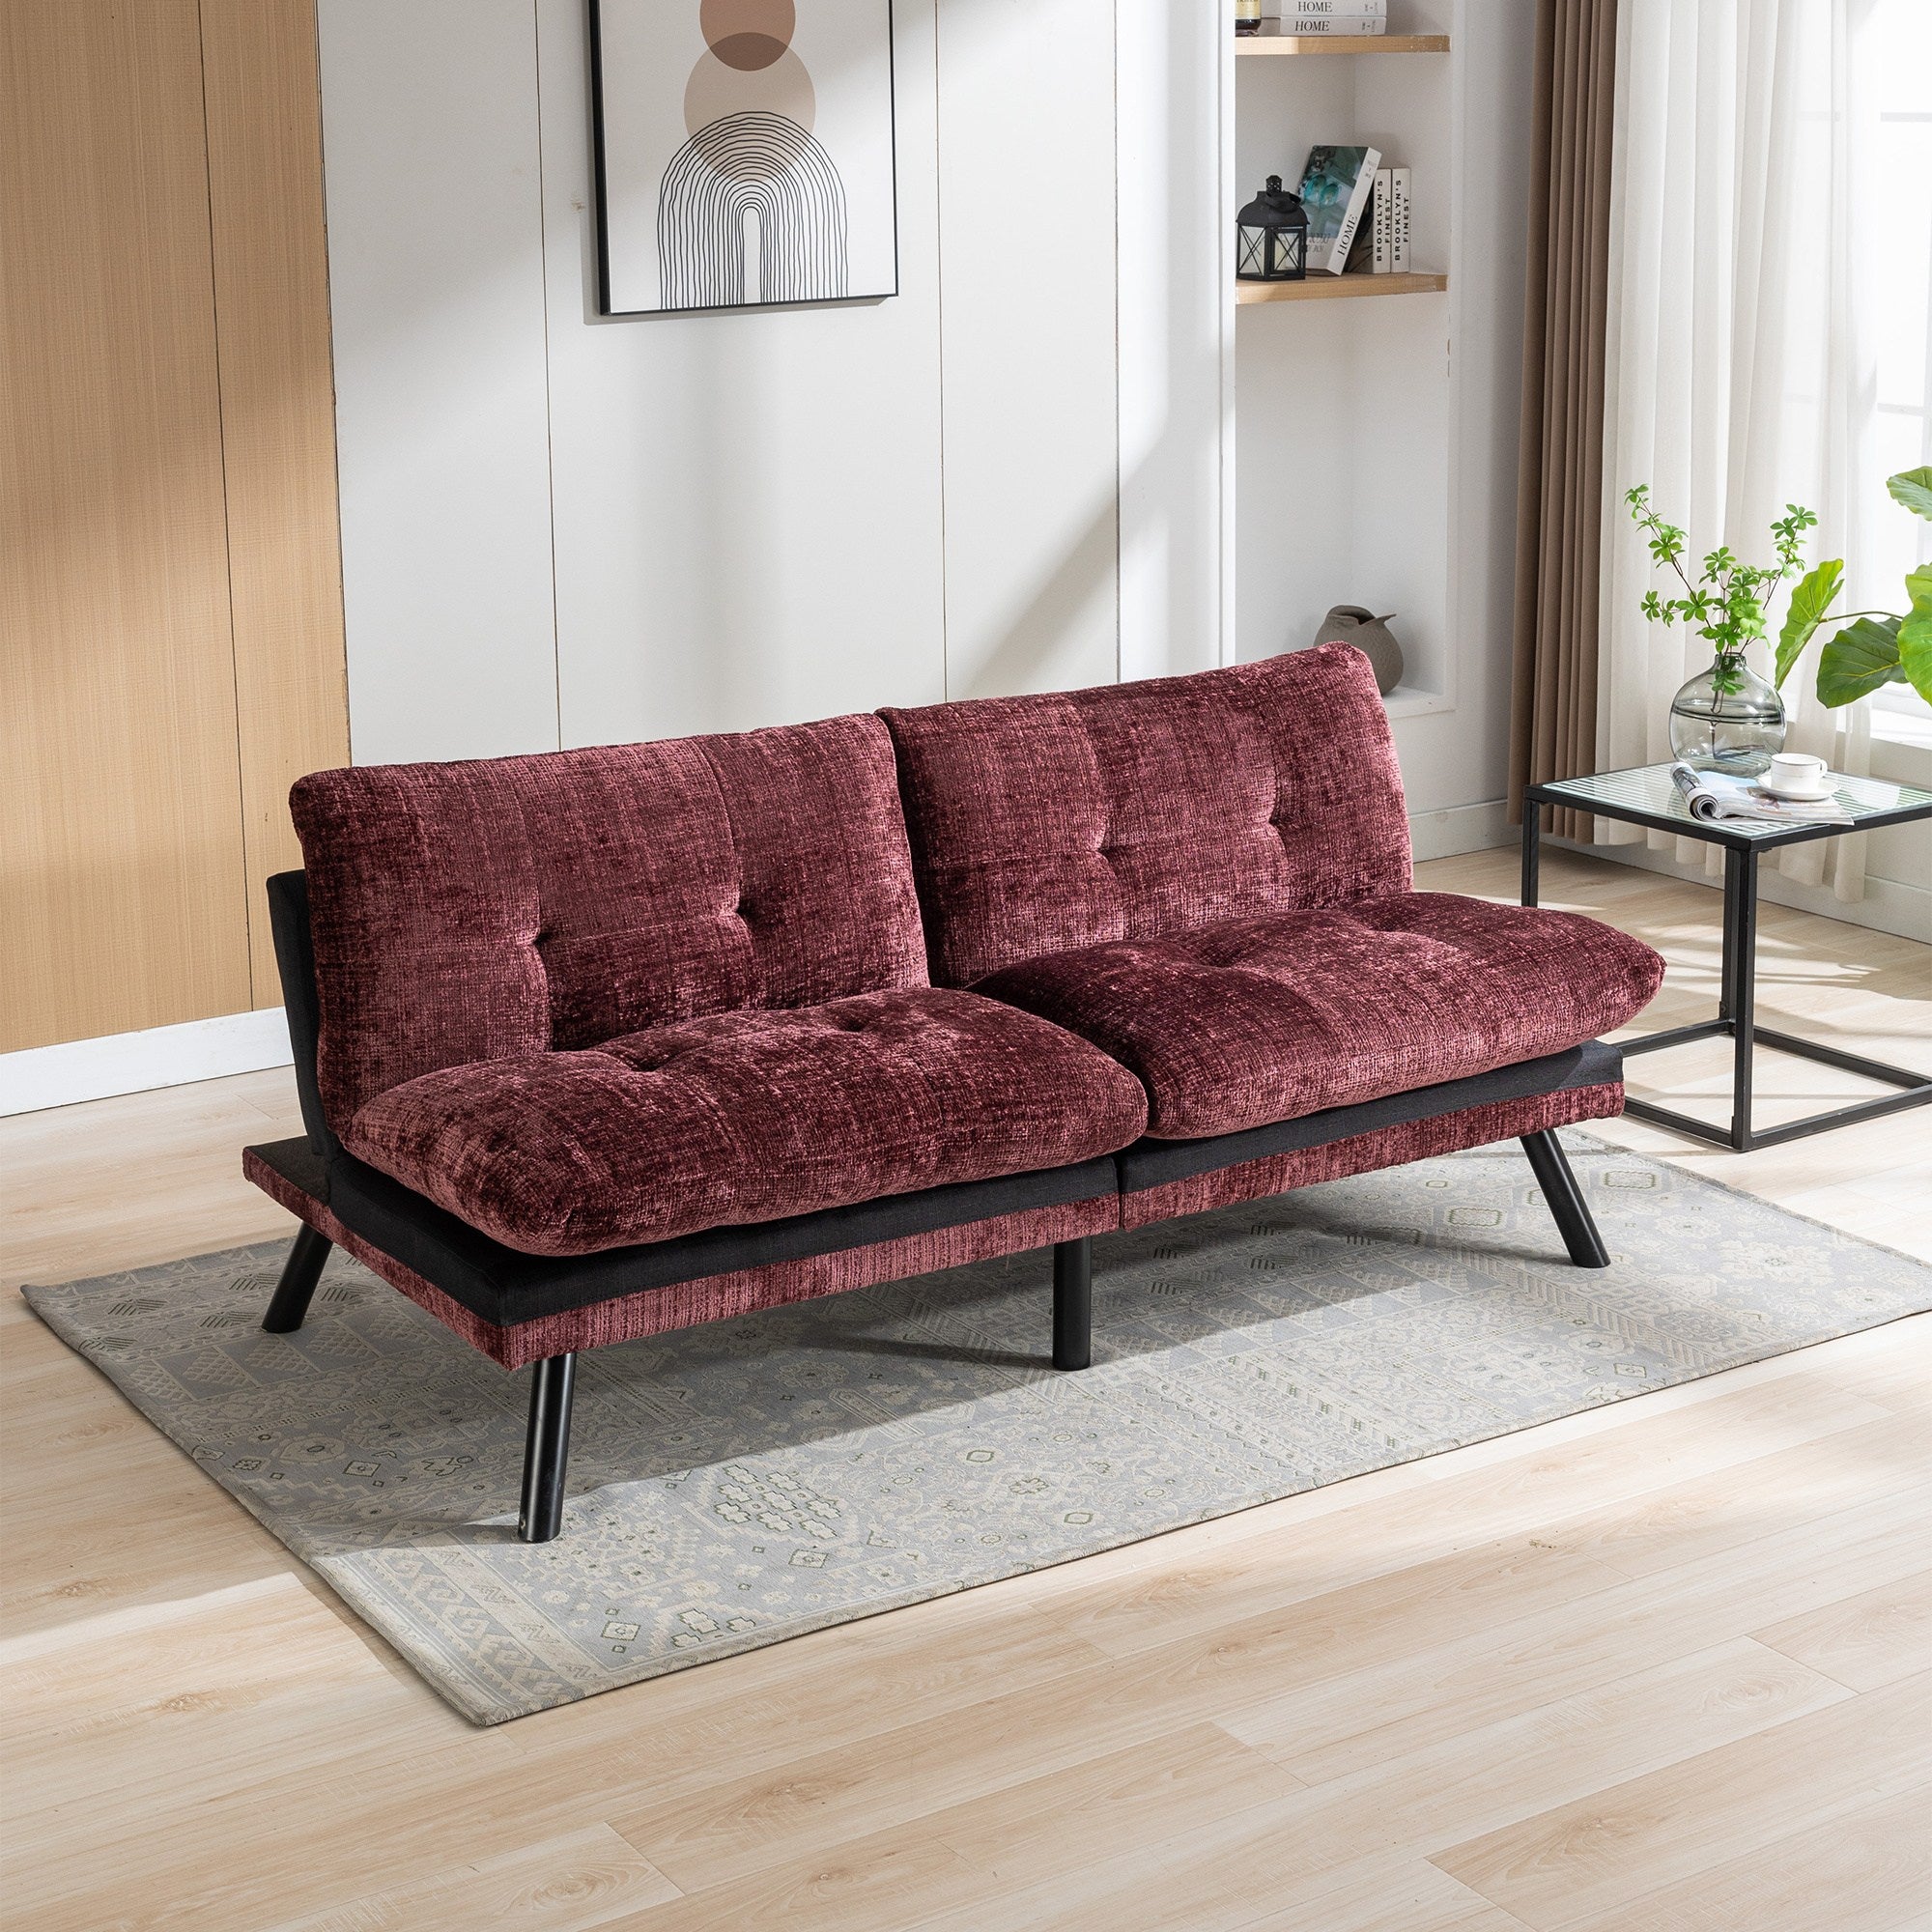 Convertible Sofa Bed Loveseat Futon Bed Breathable Adjustable Lounge Couch with Metal Legs,Futon Sets for Compact Living Space Chenille- Wine Red